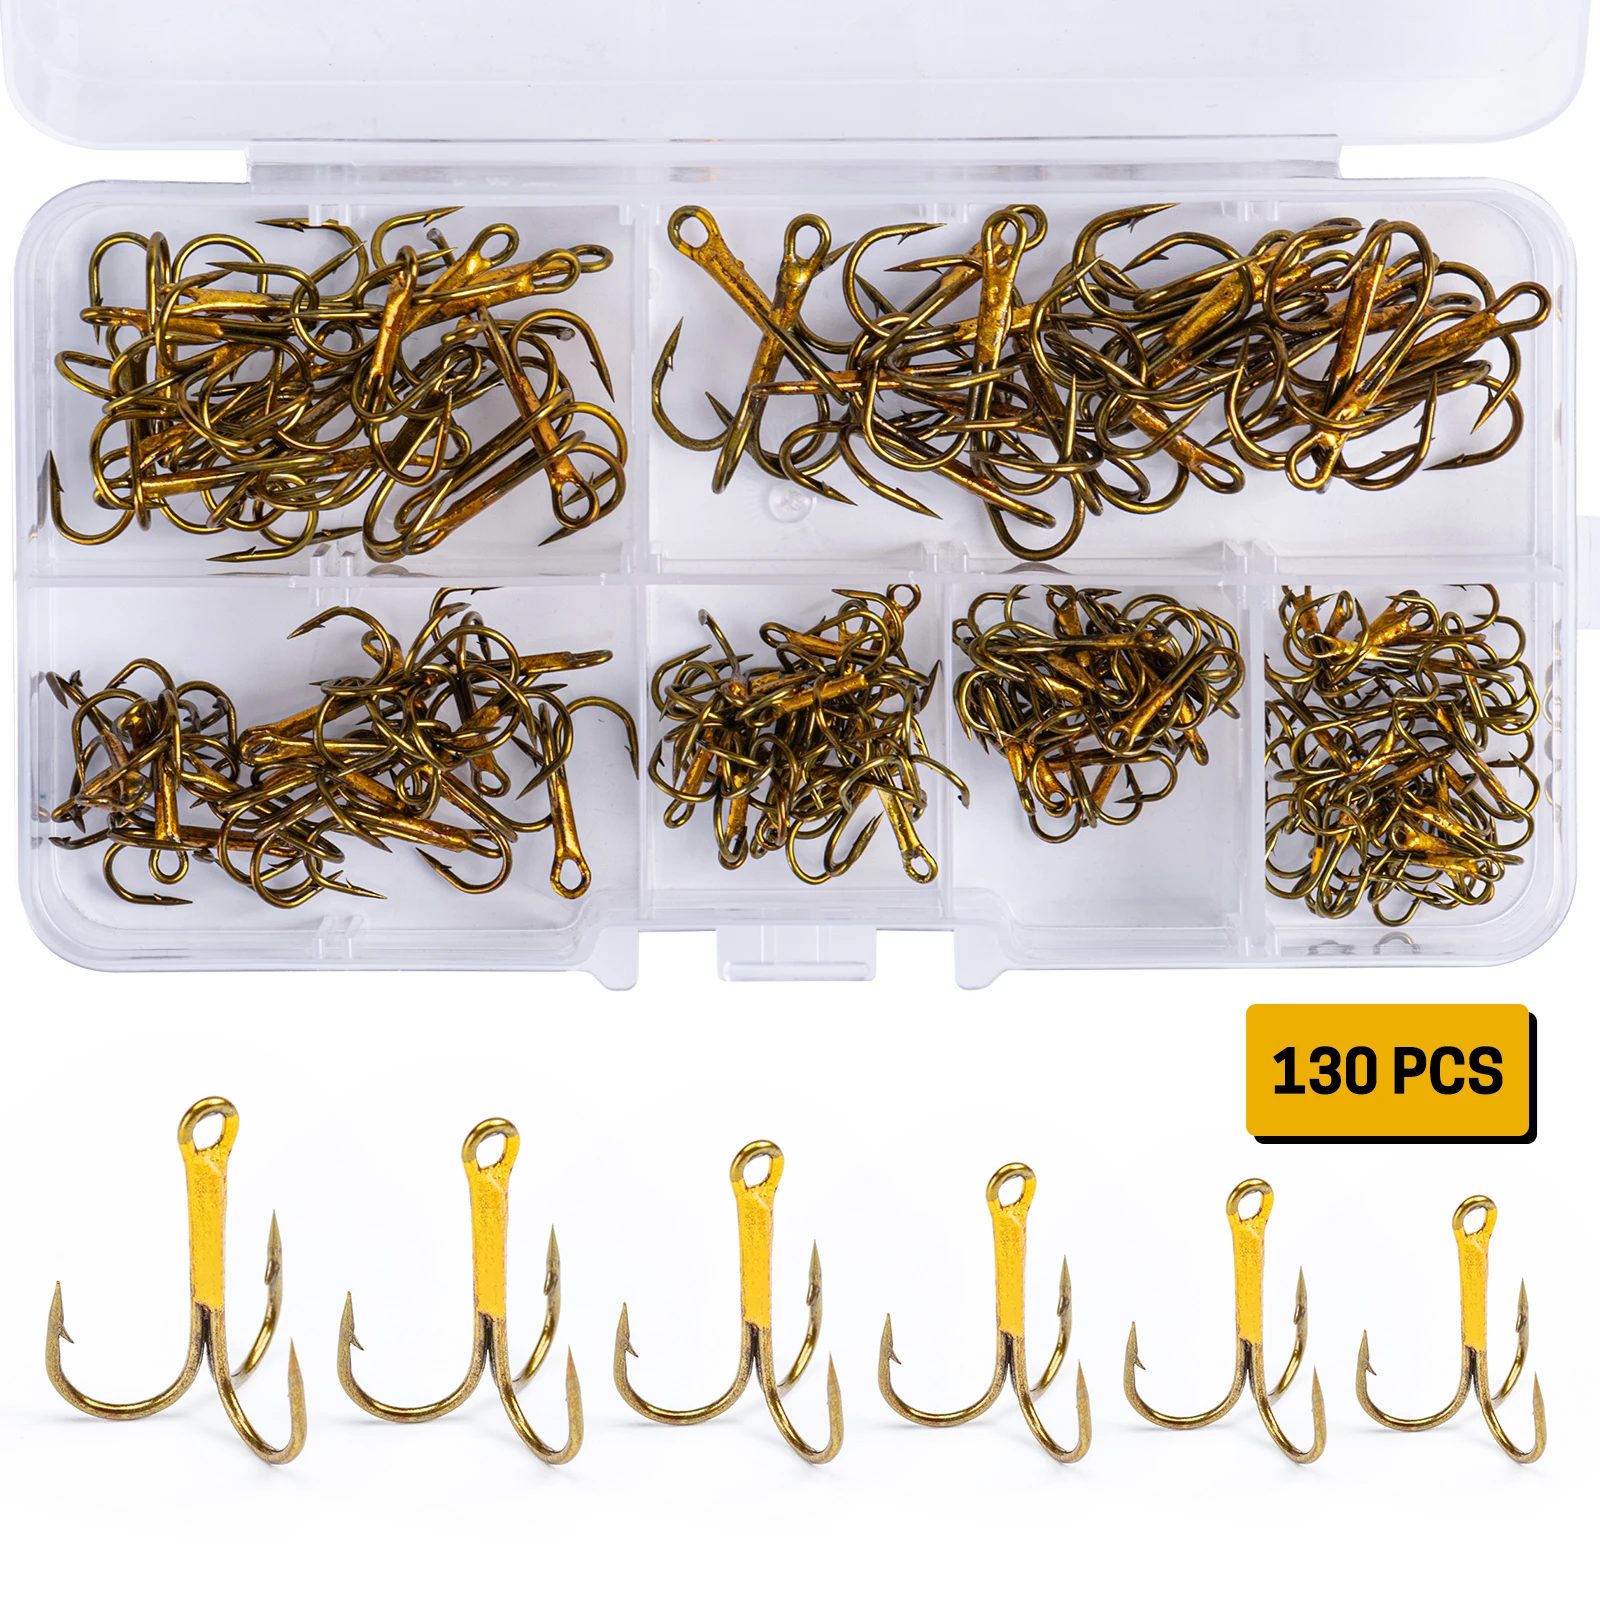 

Goture 130pcs Treble Fishing Hooks Set High Carbon Steel Fish Hook Set Tackle Accessories Item with Boxfor Saltwater Freshwater